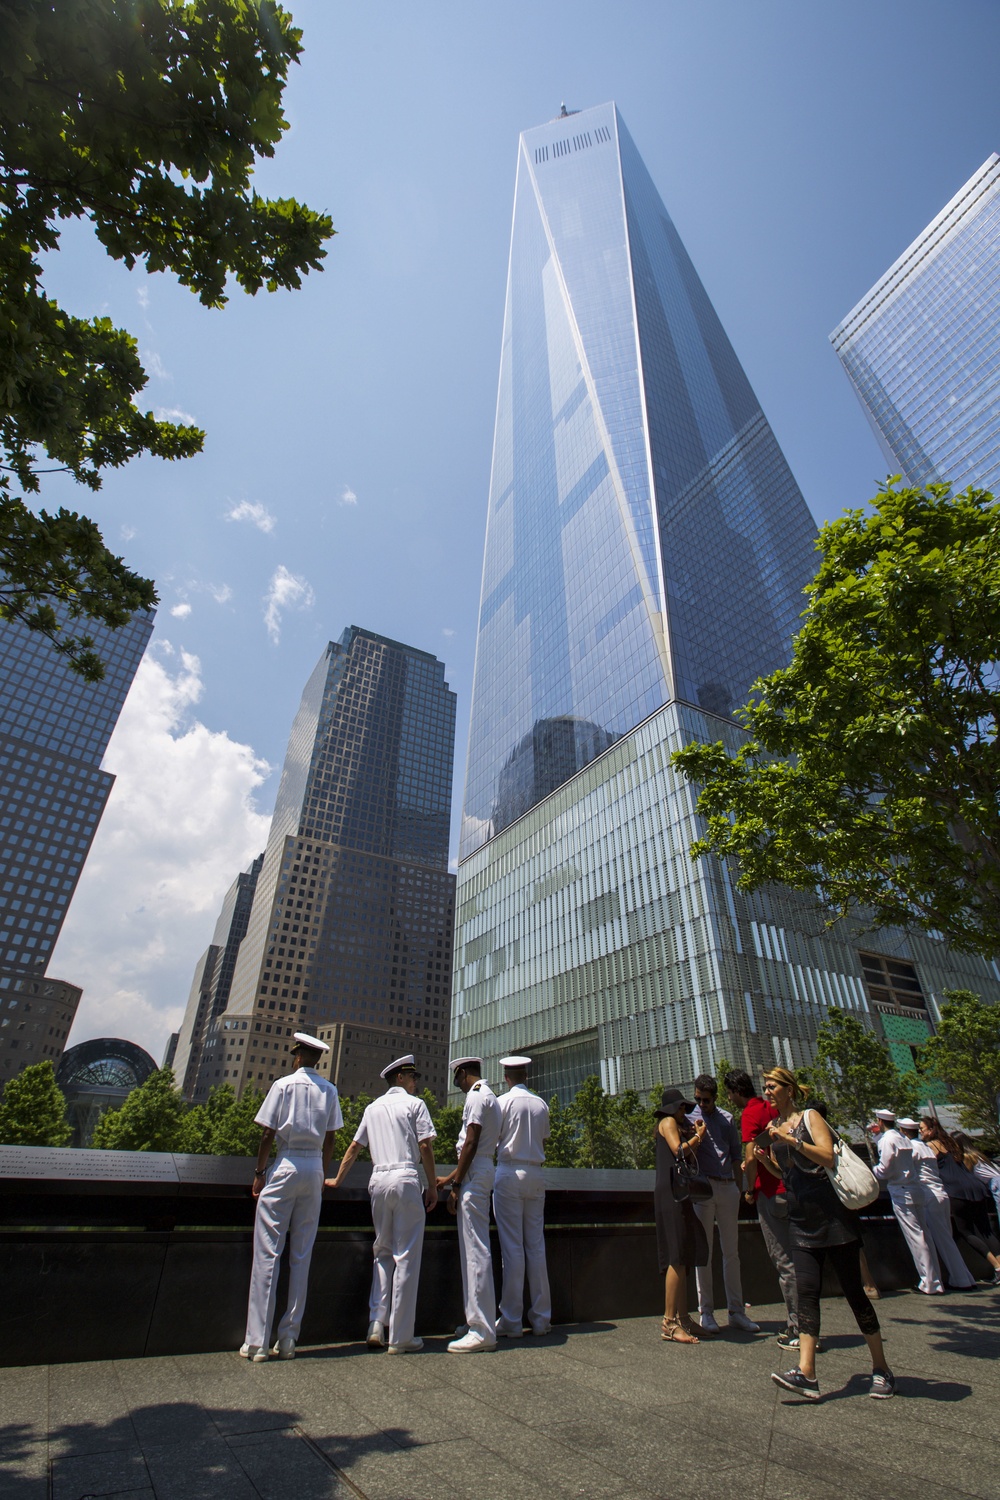 9/11 Memorial Joint Promotion and Re-enlistment